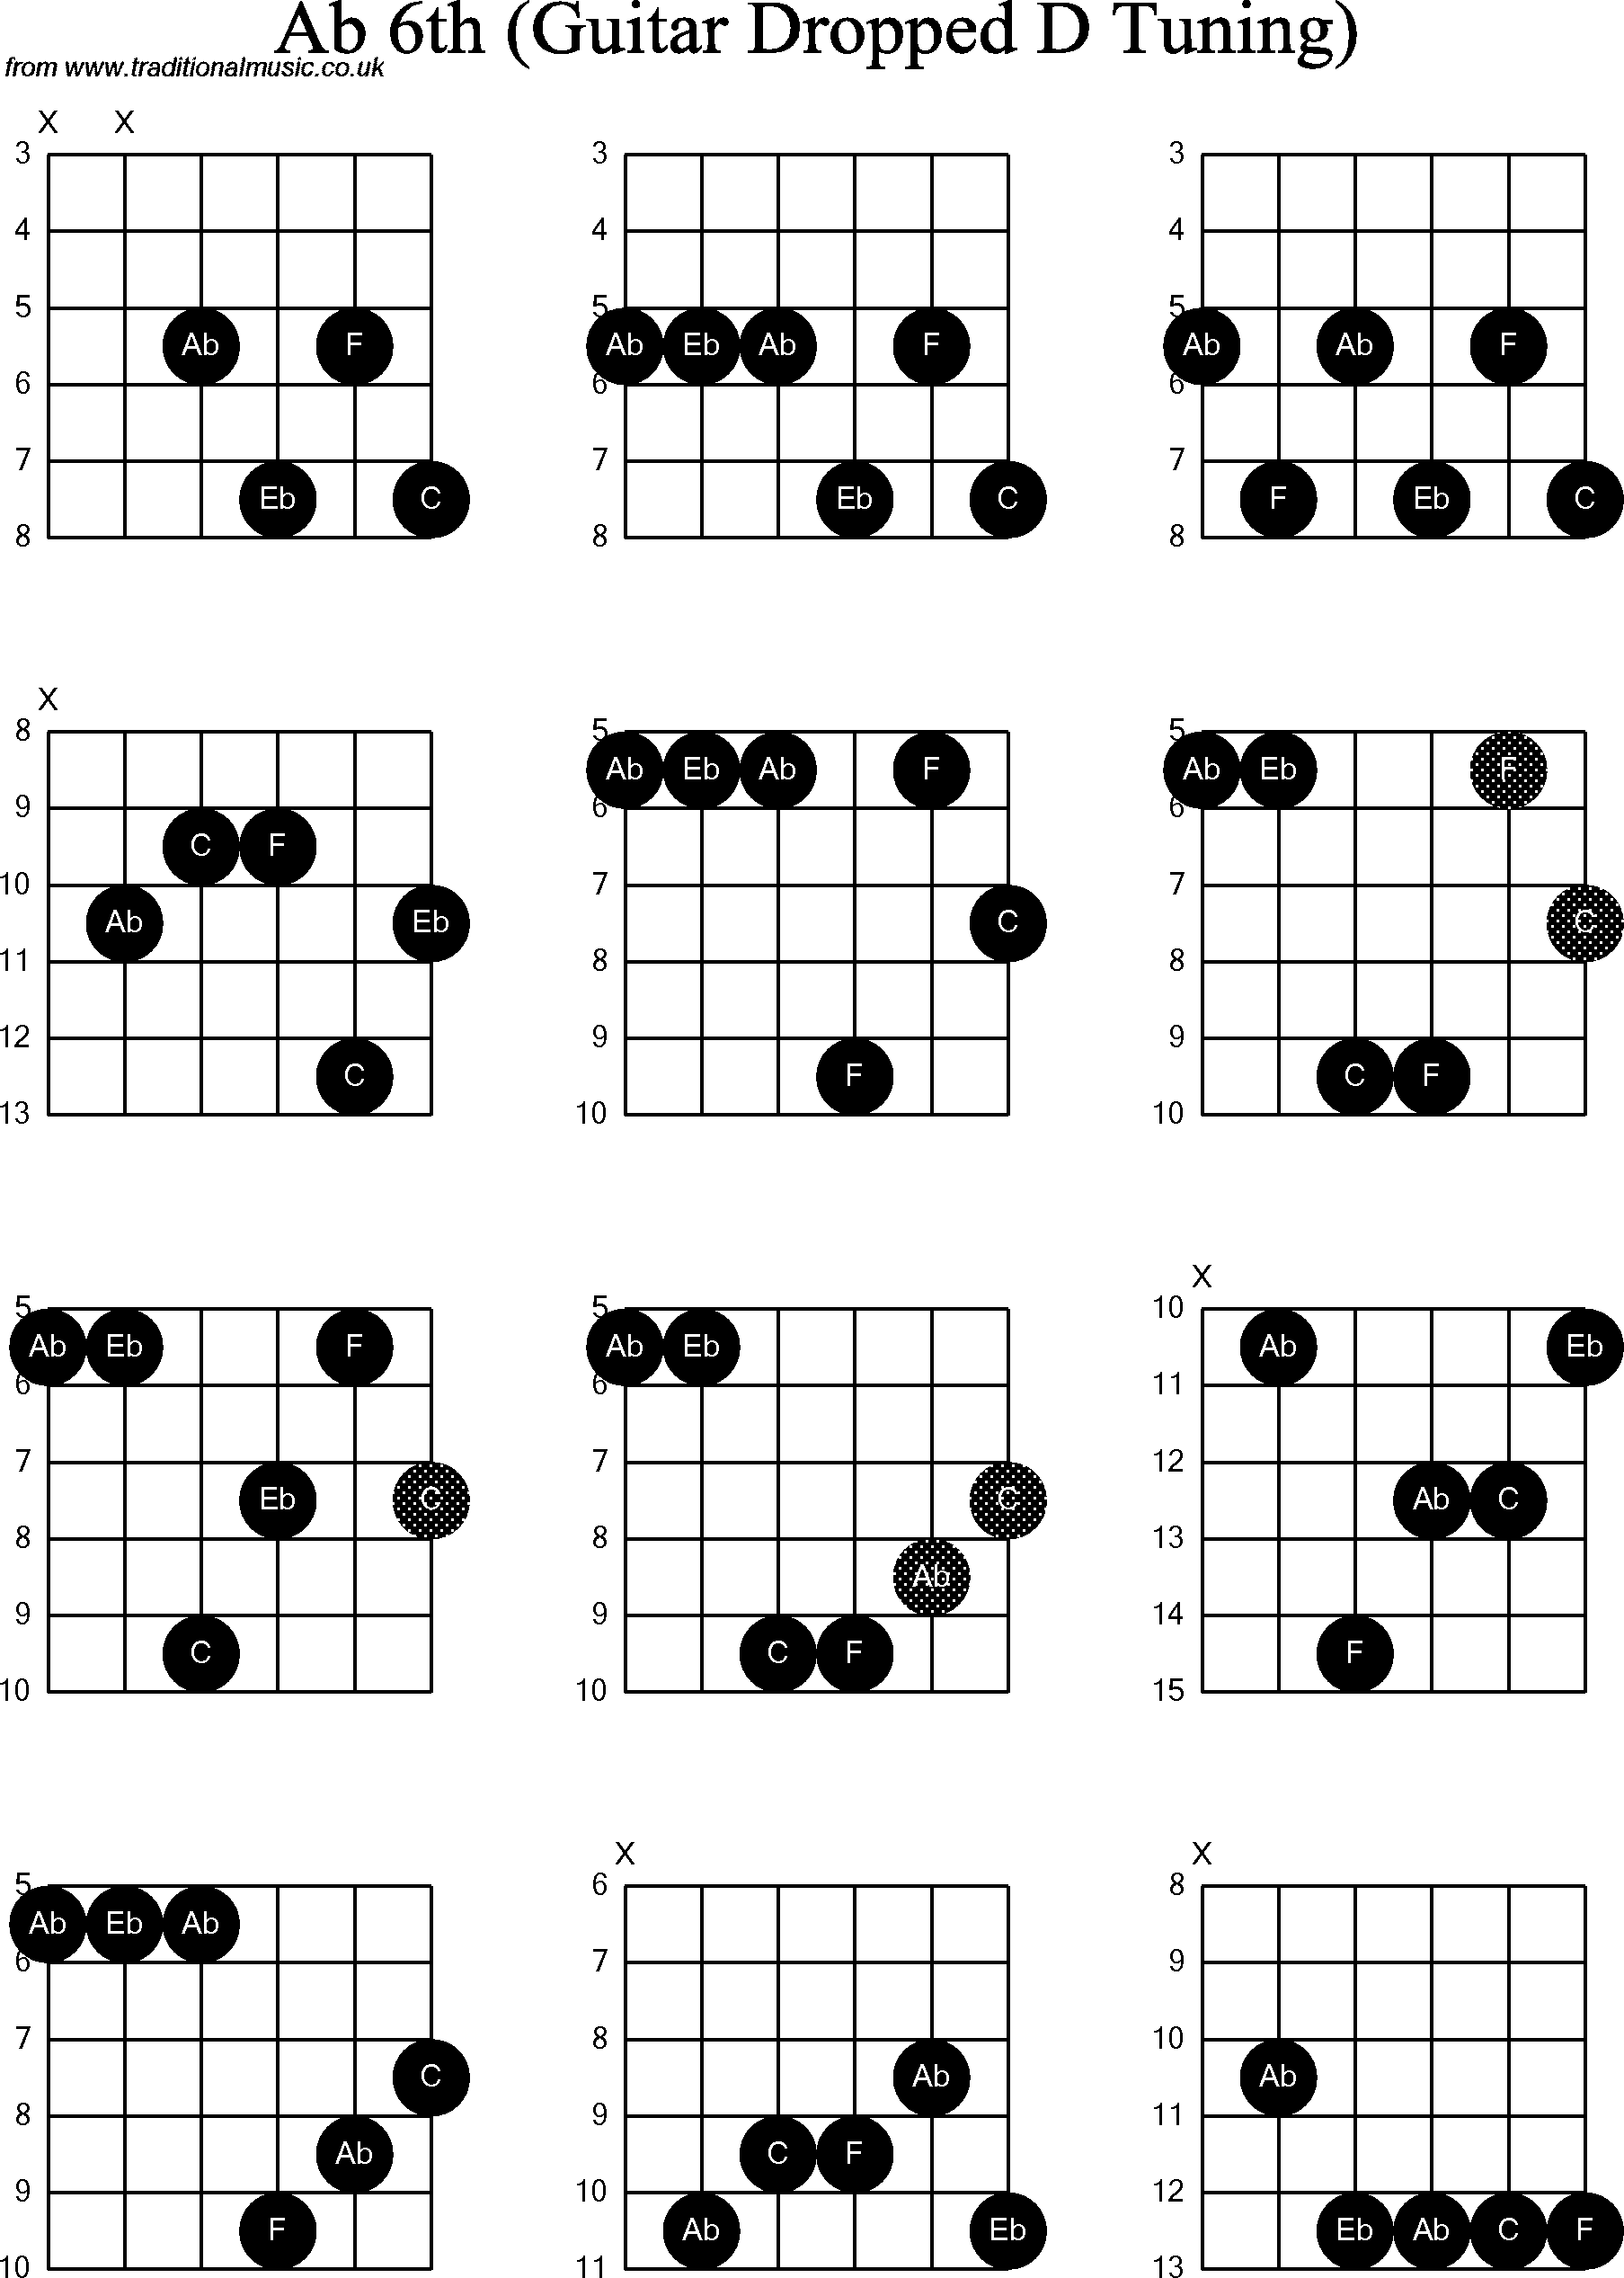 Chord diagrams for dropped D Guitar(DADGBE), Ab6th